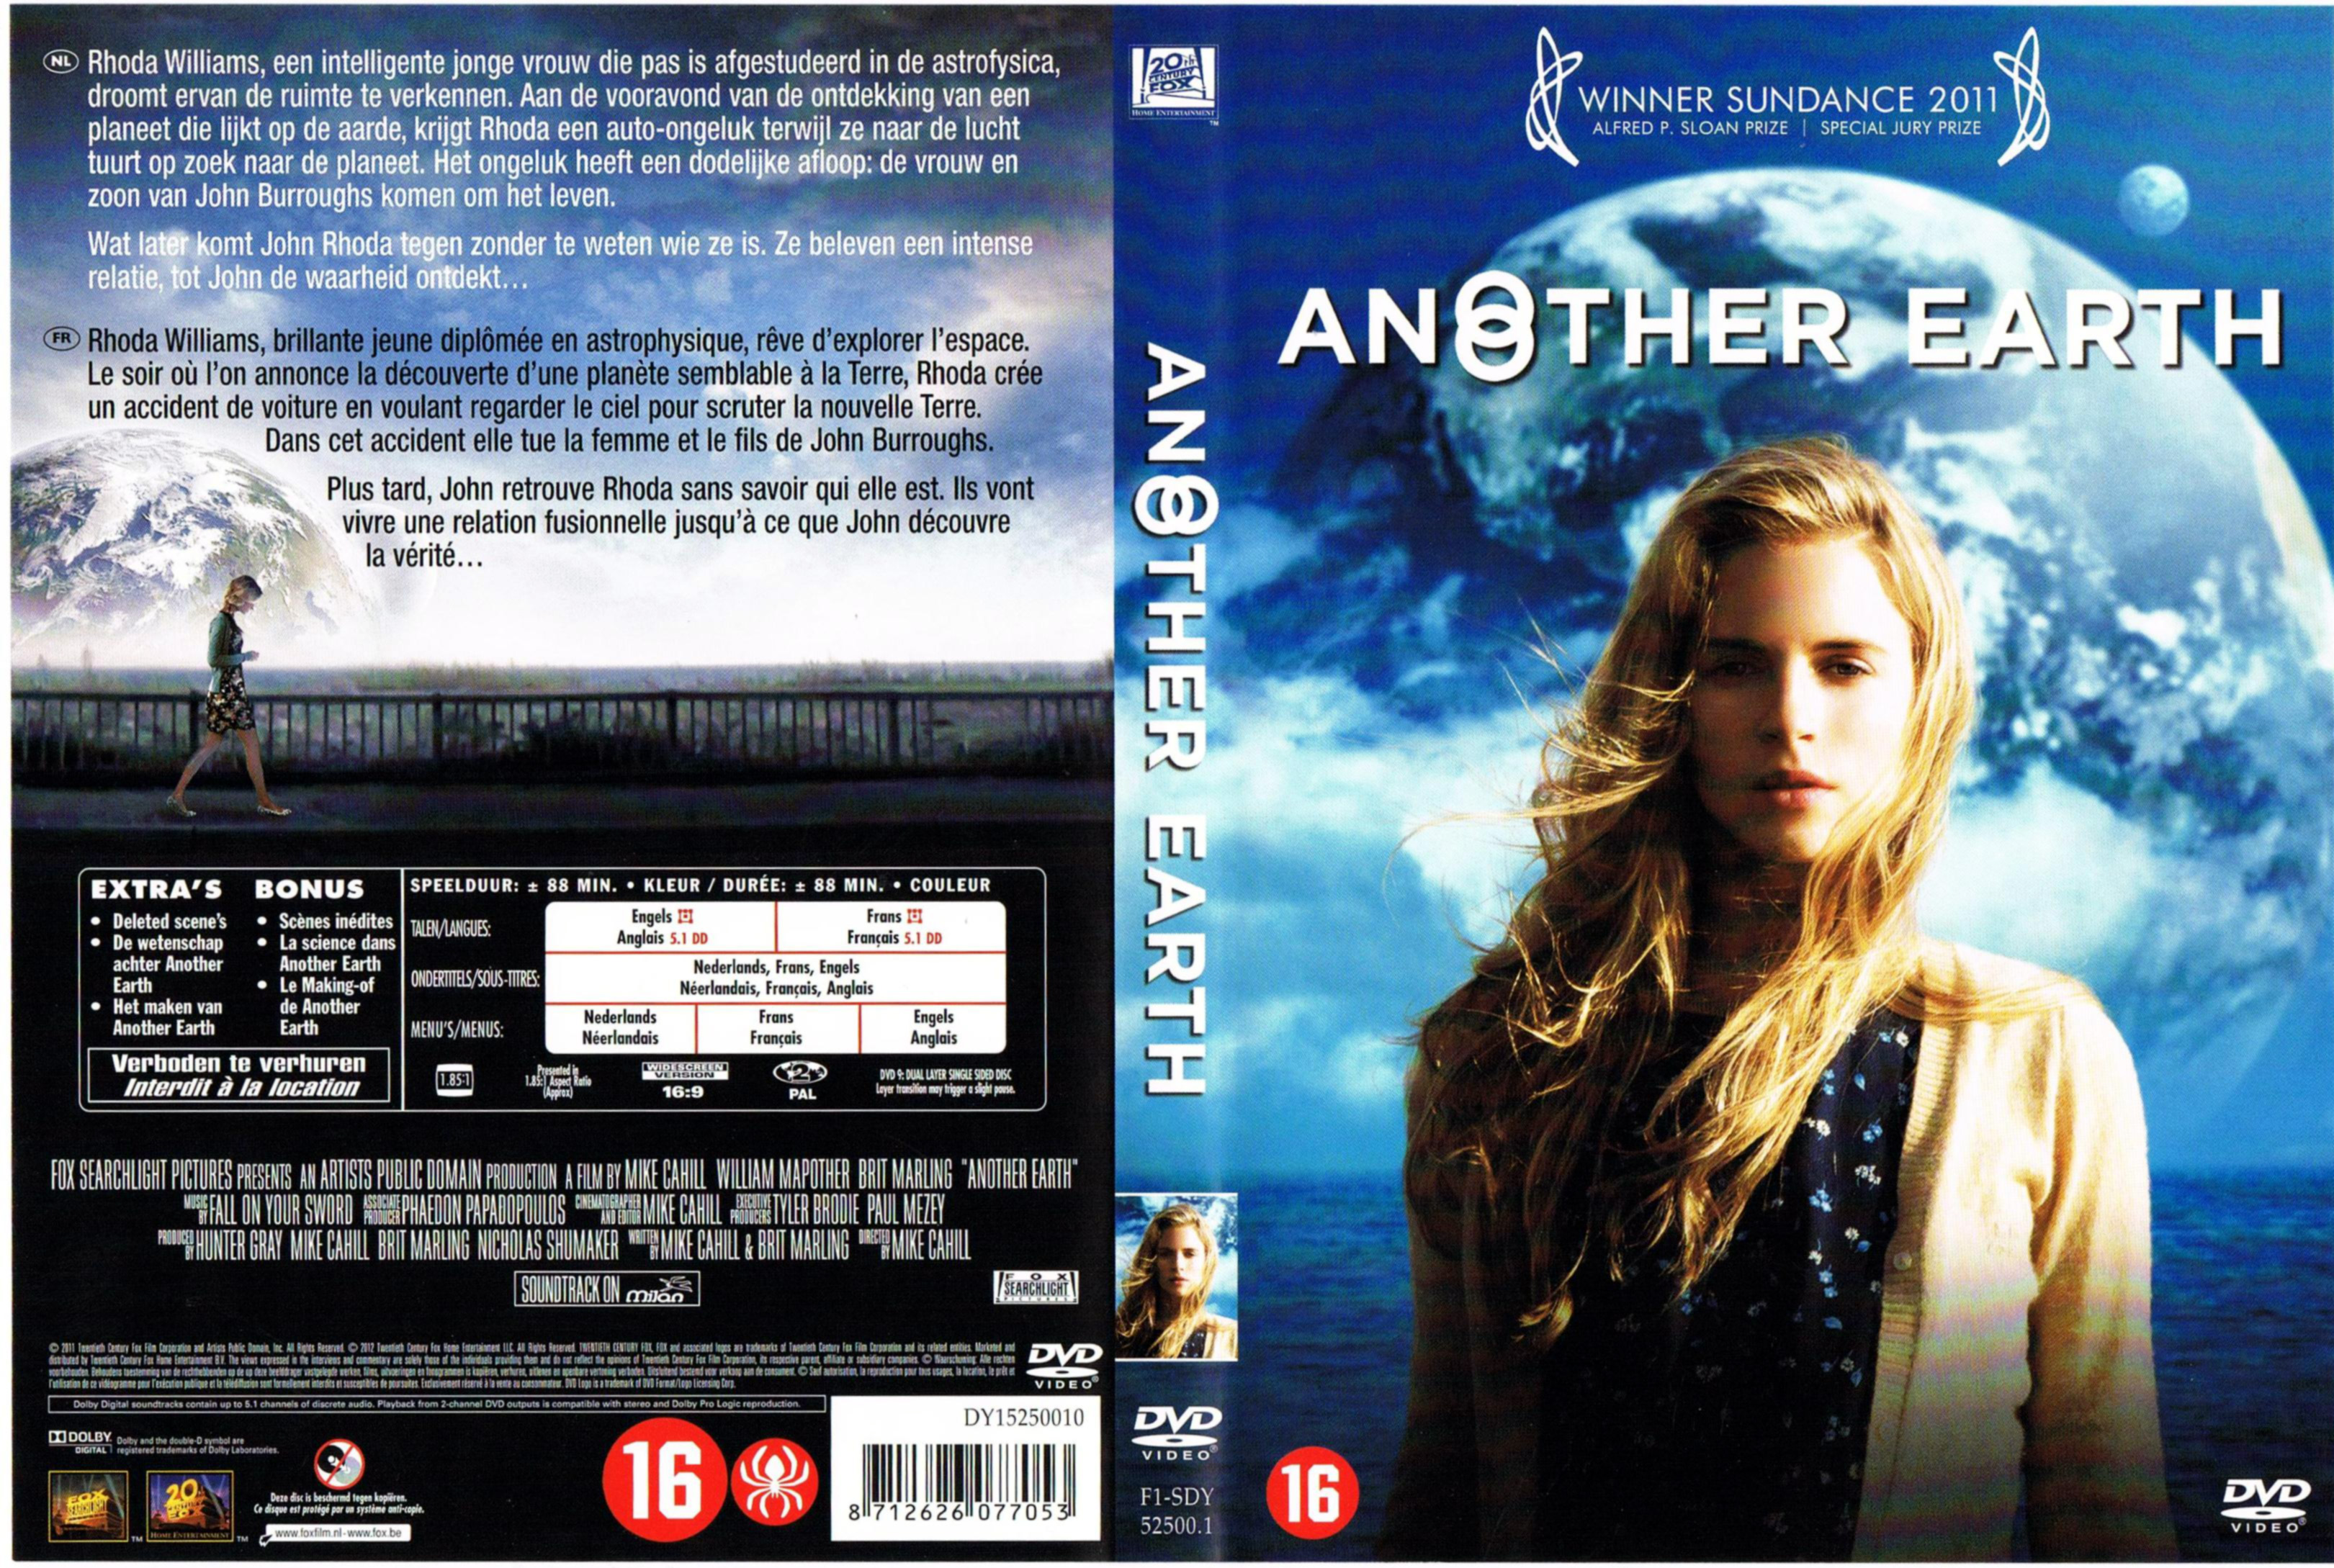 Jaquette DVD Another Earth